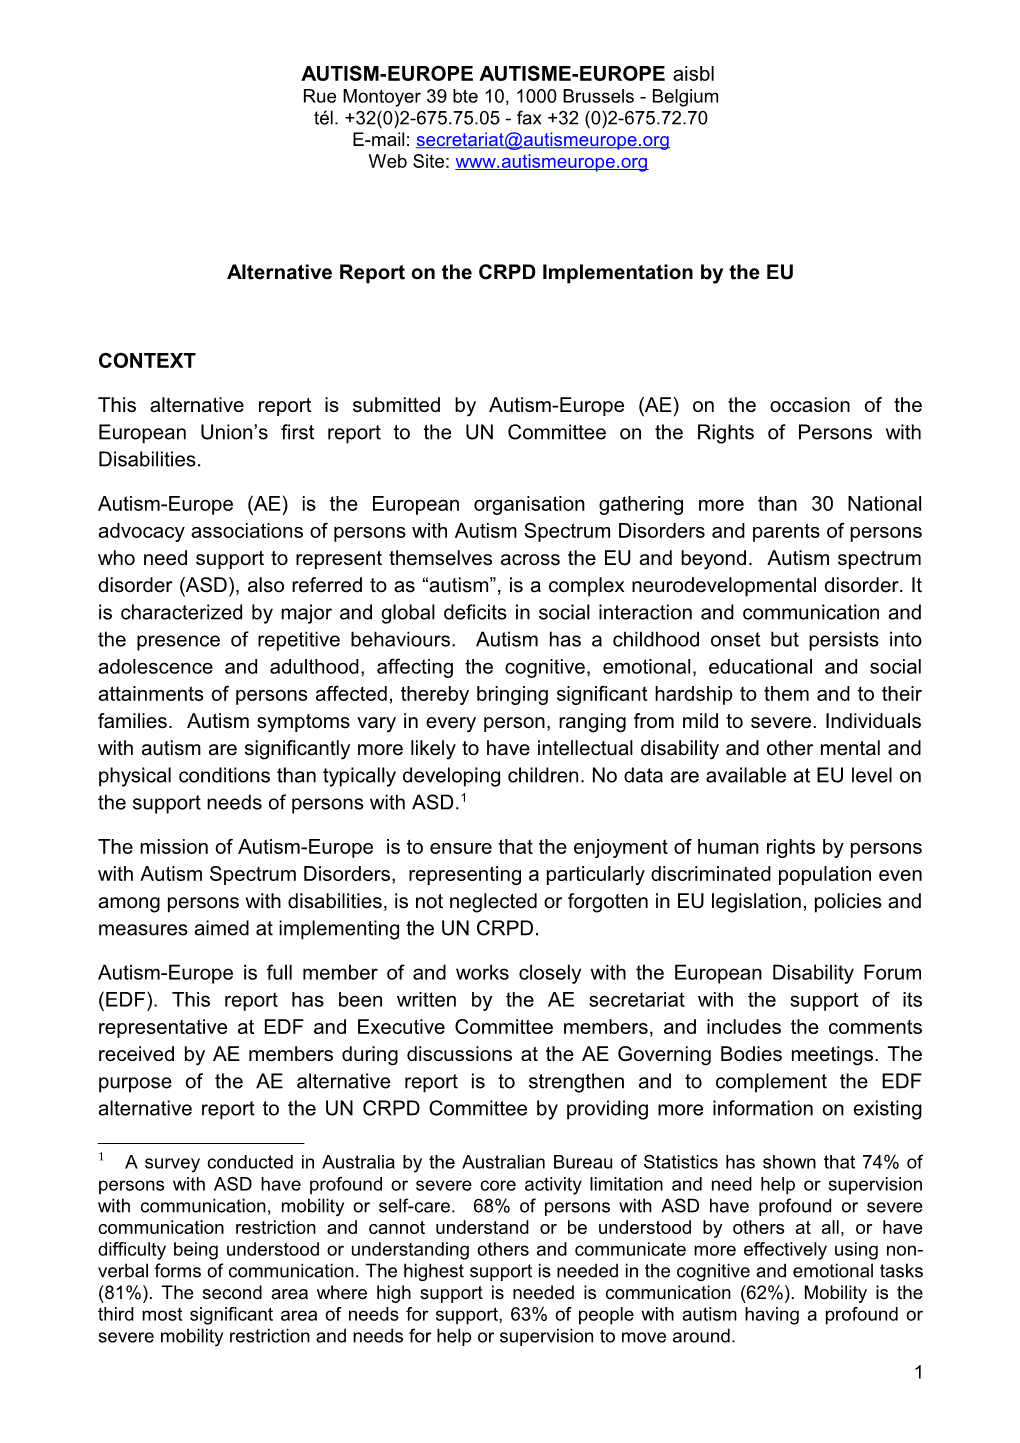 Alternative Report on the CRPD Implementation by the EU